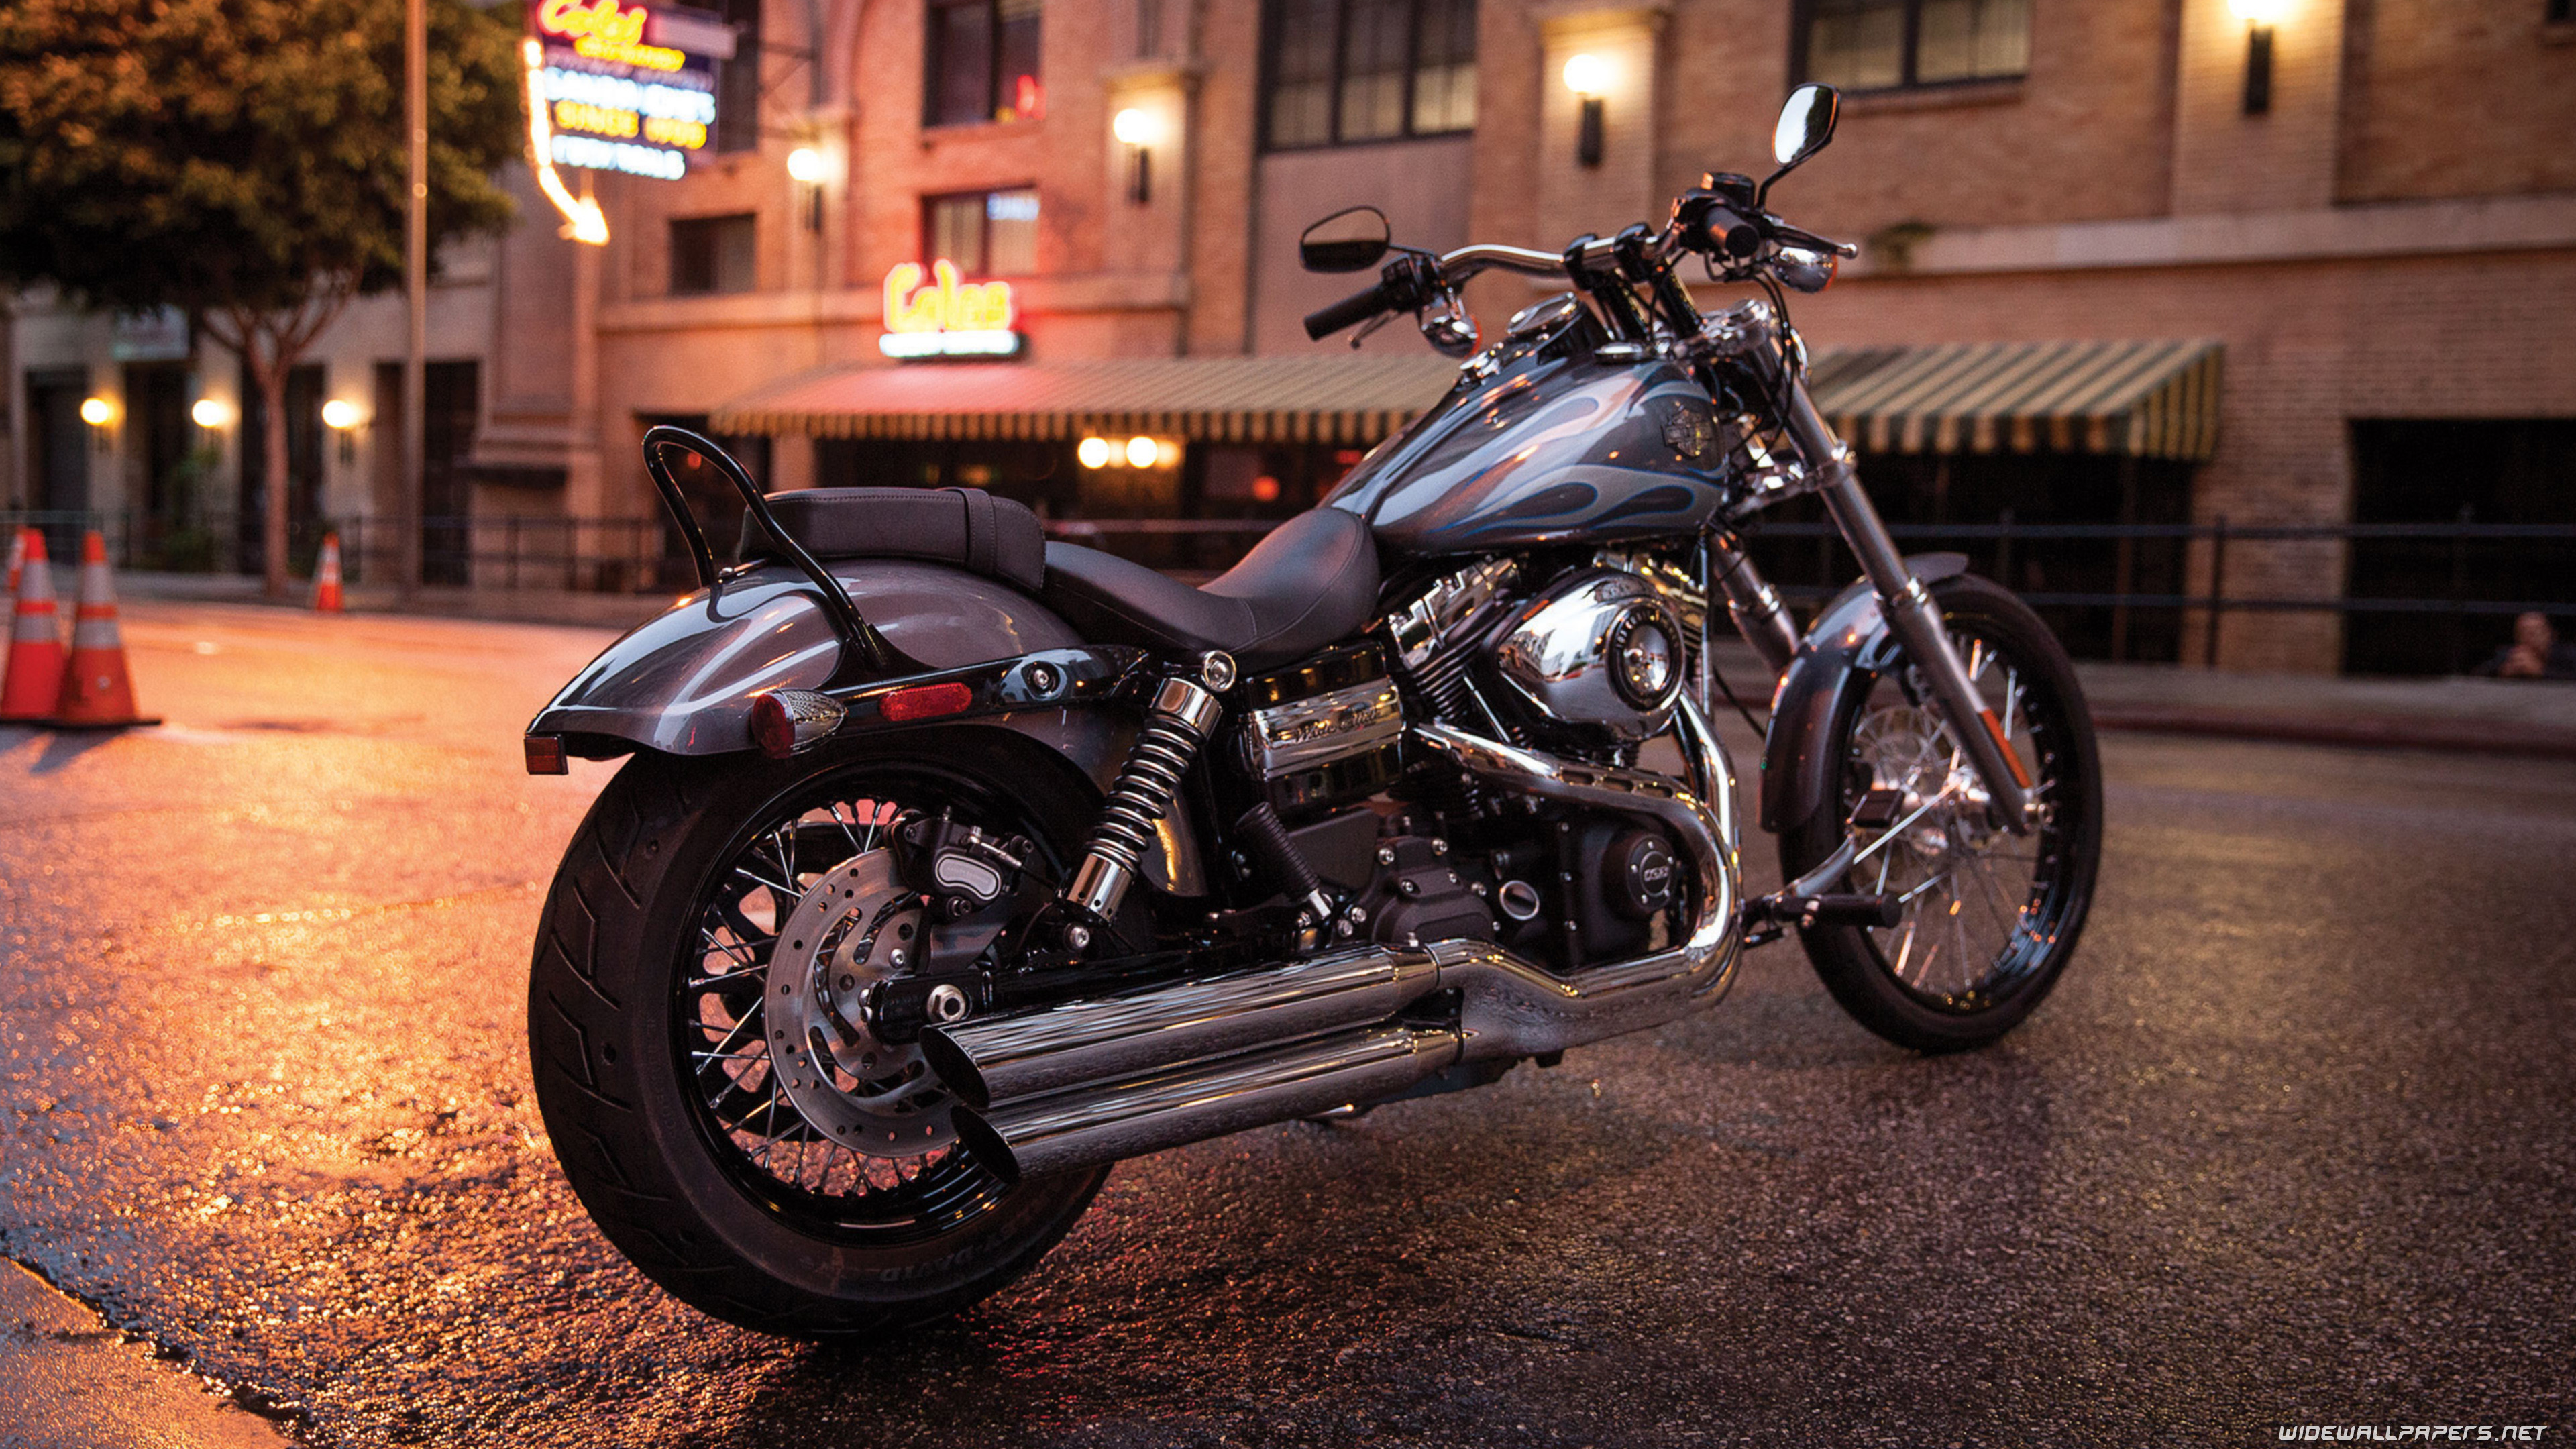 3840x2160 Harley-Davidson Dyna Wide Glide motorcycle wallpapers ...